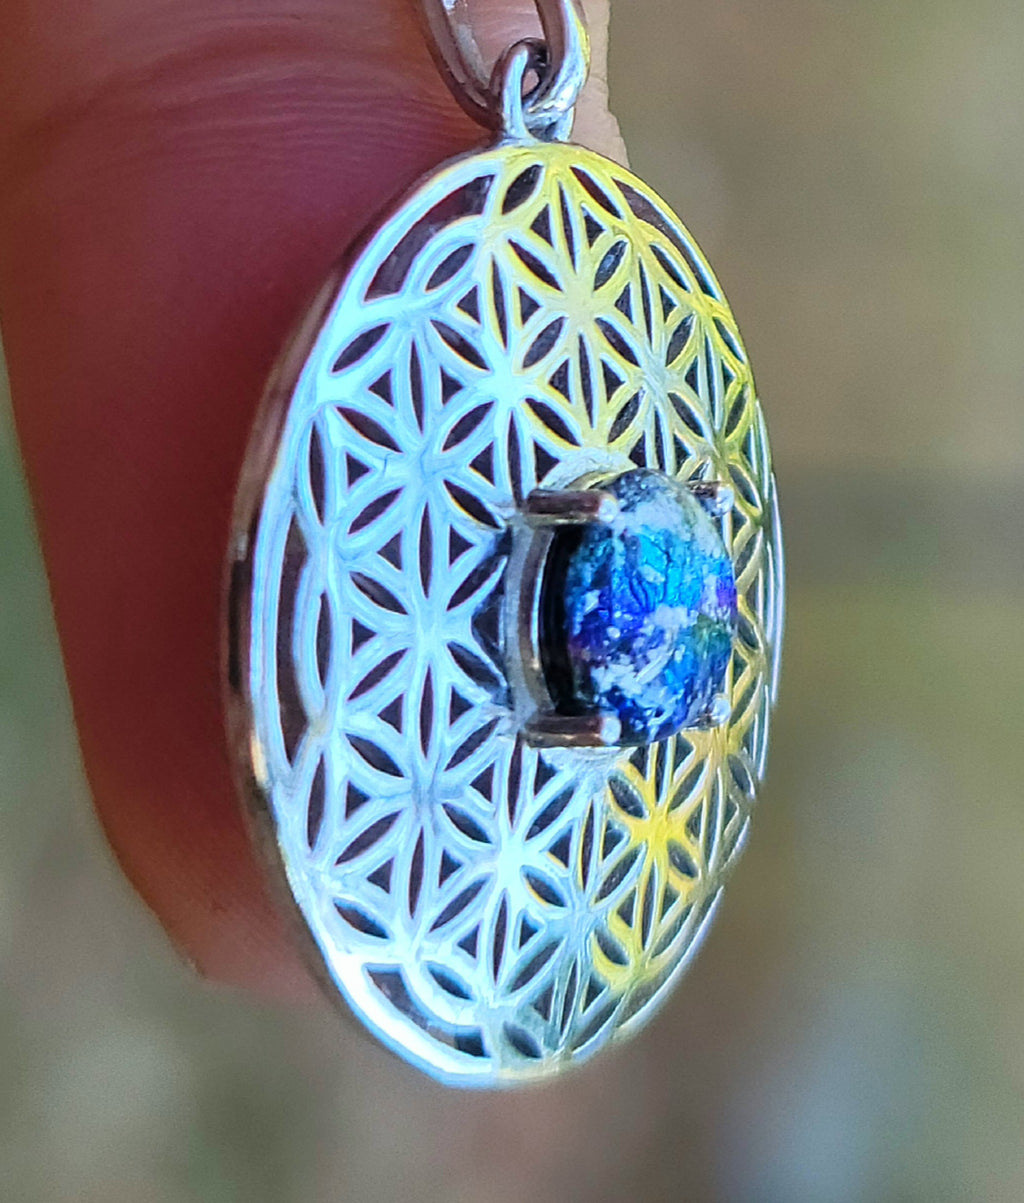 NEW Boho Flower of Life Cremation Jewelry Pendant Sacred Geometry Ashes InFused Glass